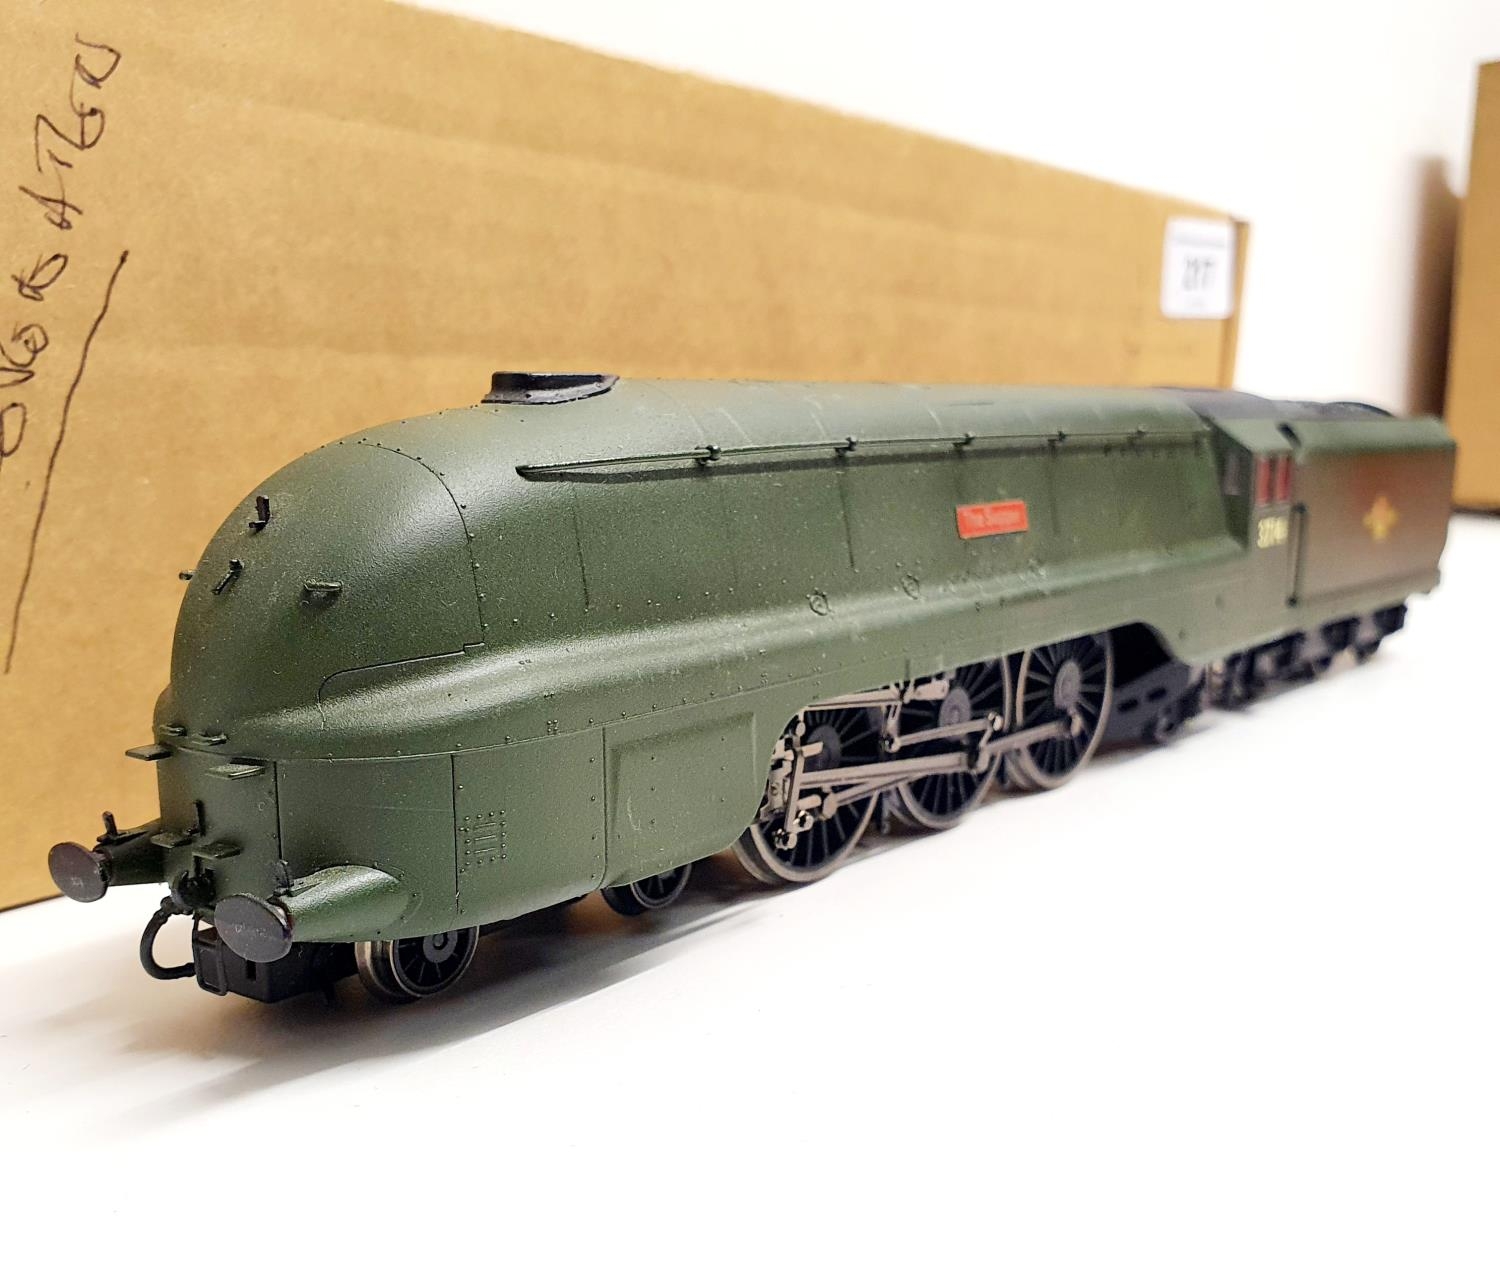 A Hornby OO gauge 4-6-2 locomotive and tender, No R2179, in a later box Provenance: From a vast